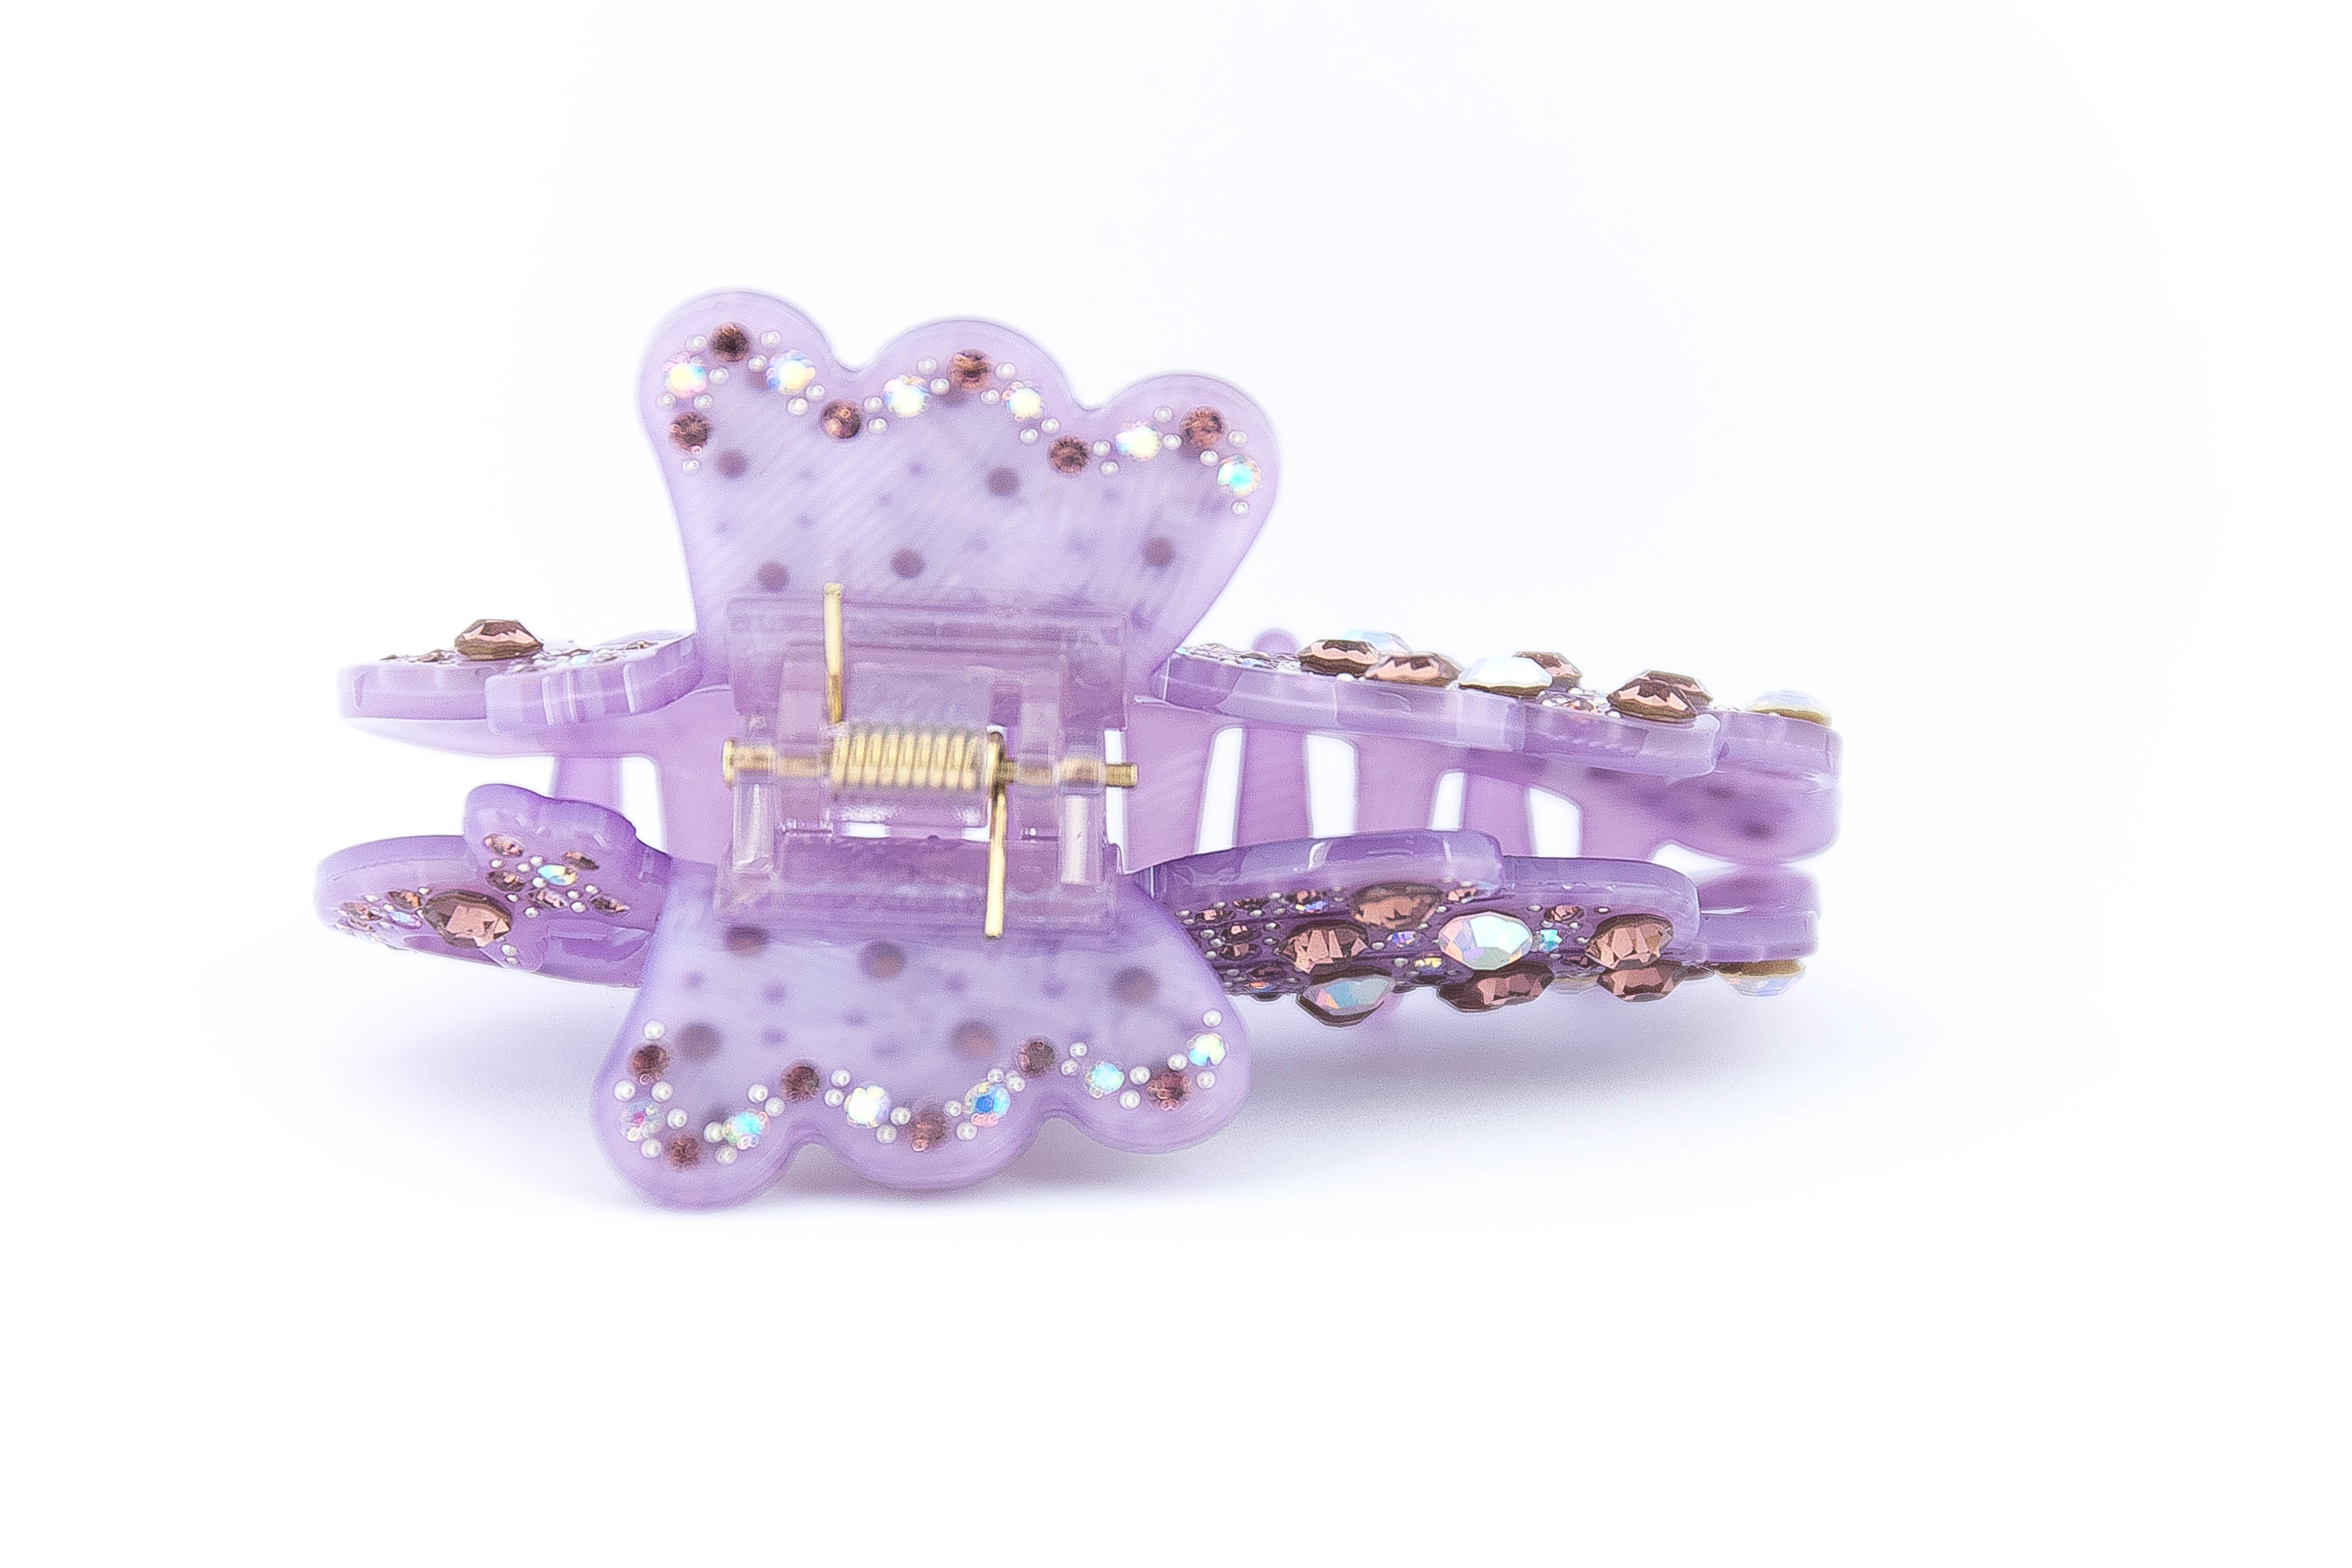 Butterfly Hairclip - Lavendel